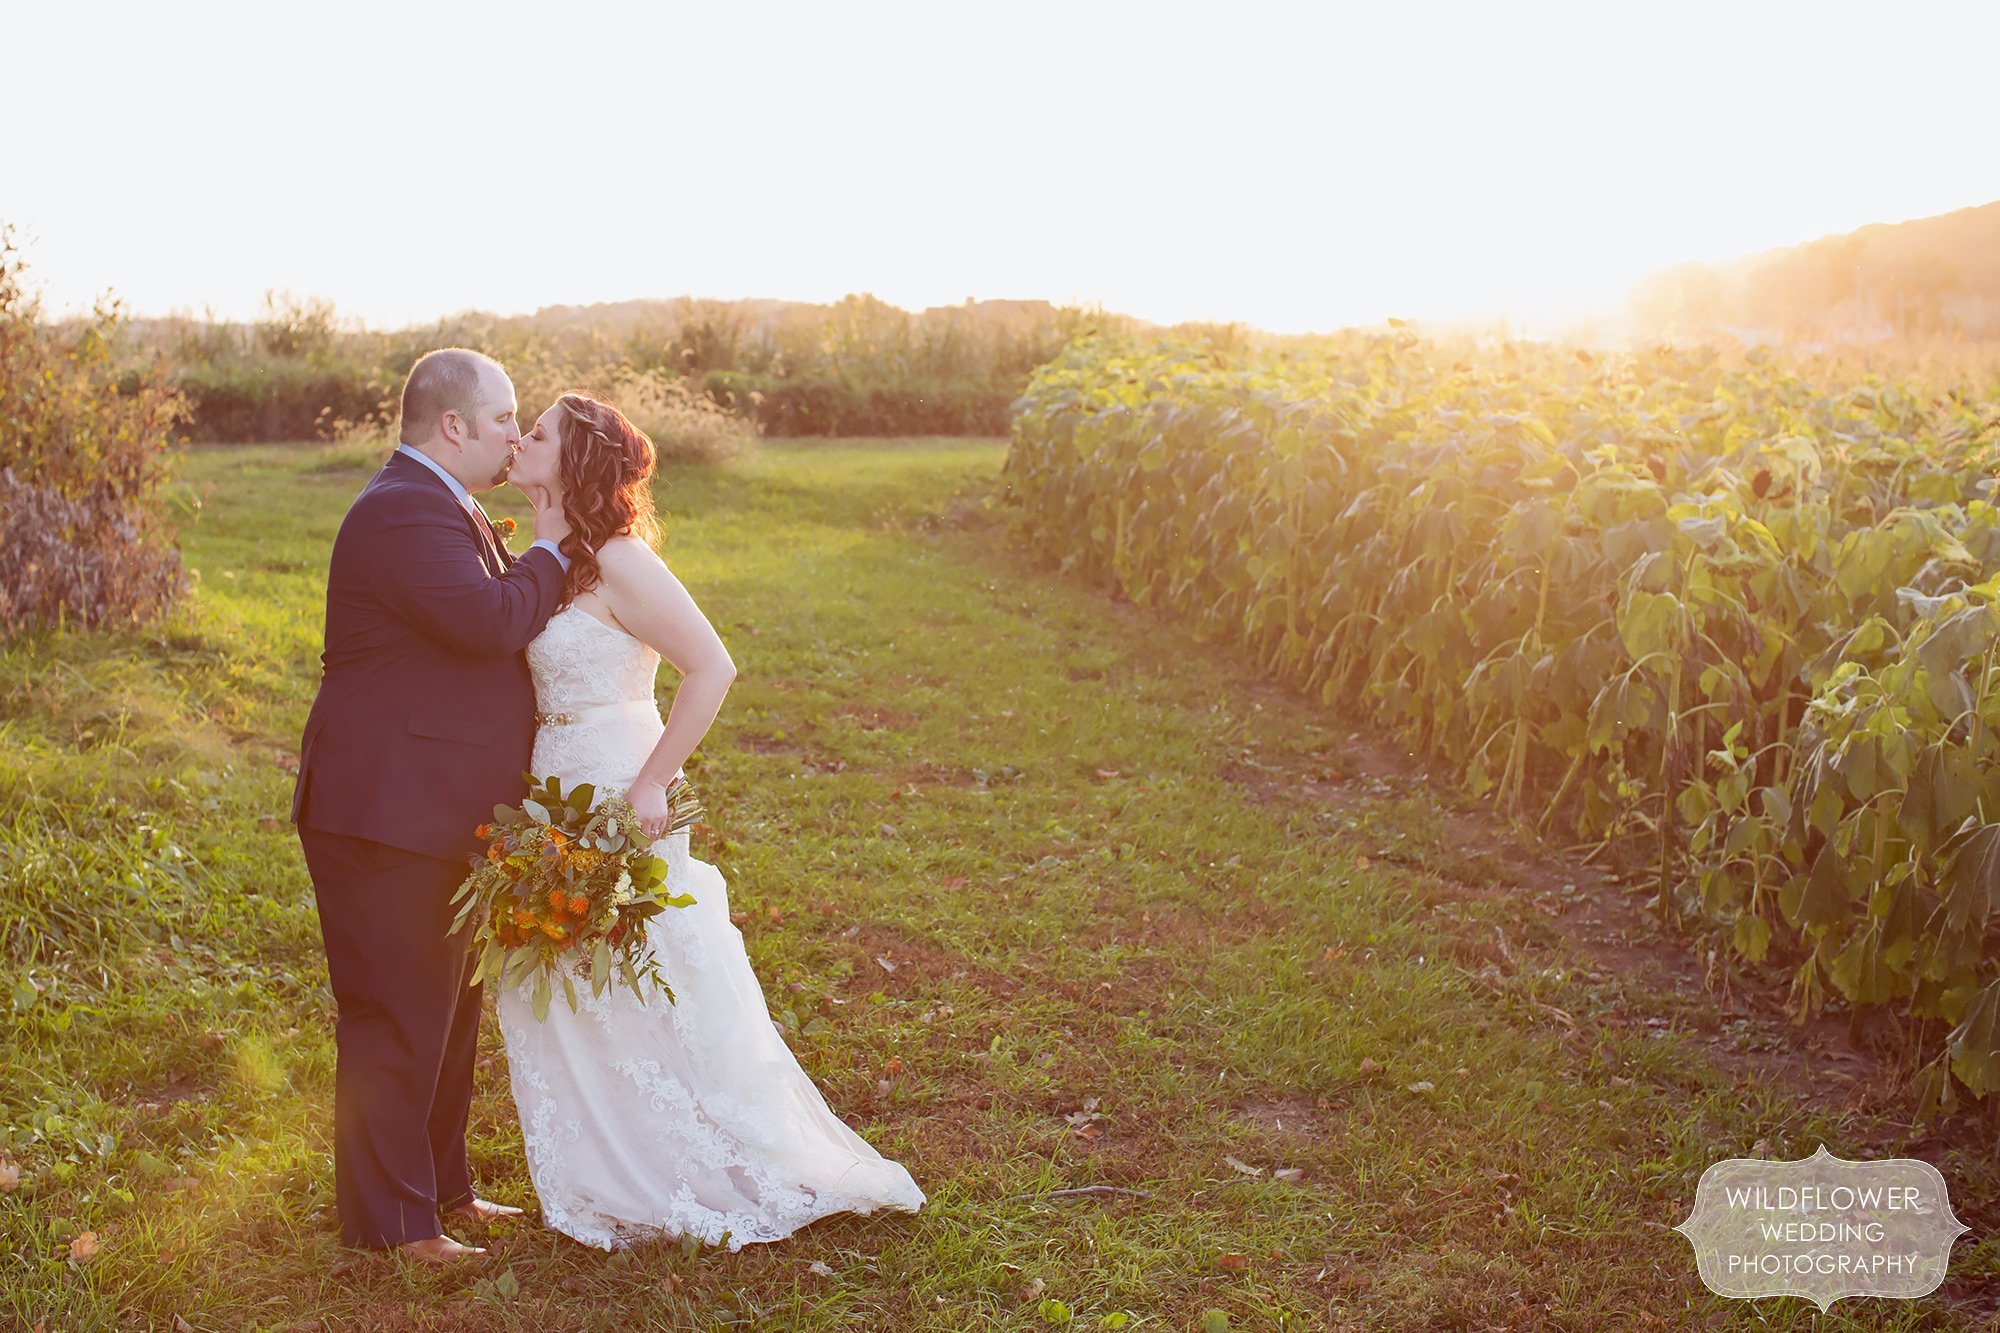 Ethereal wedding portrait of the bride and groom at sunset after this barn wedding north of KC.